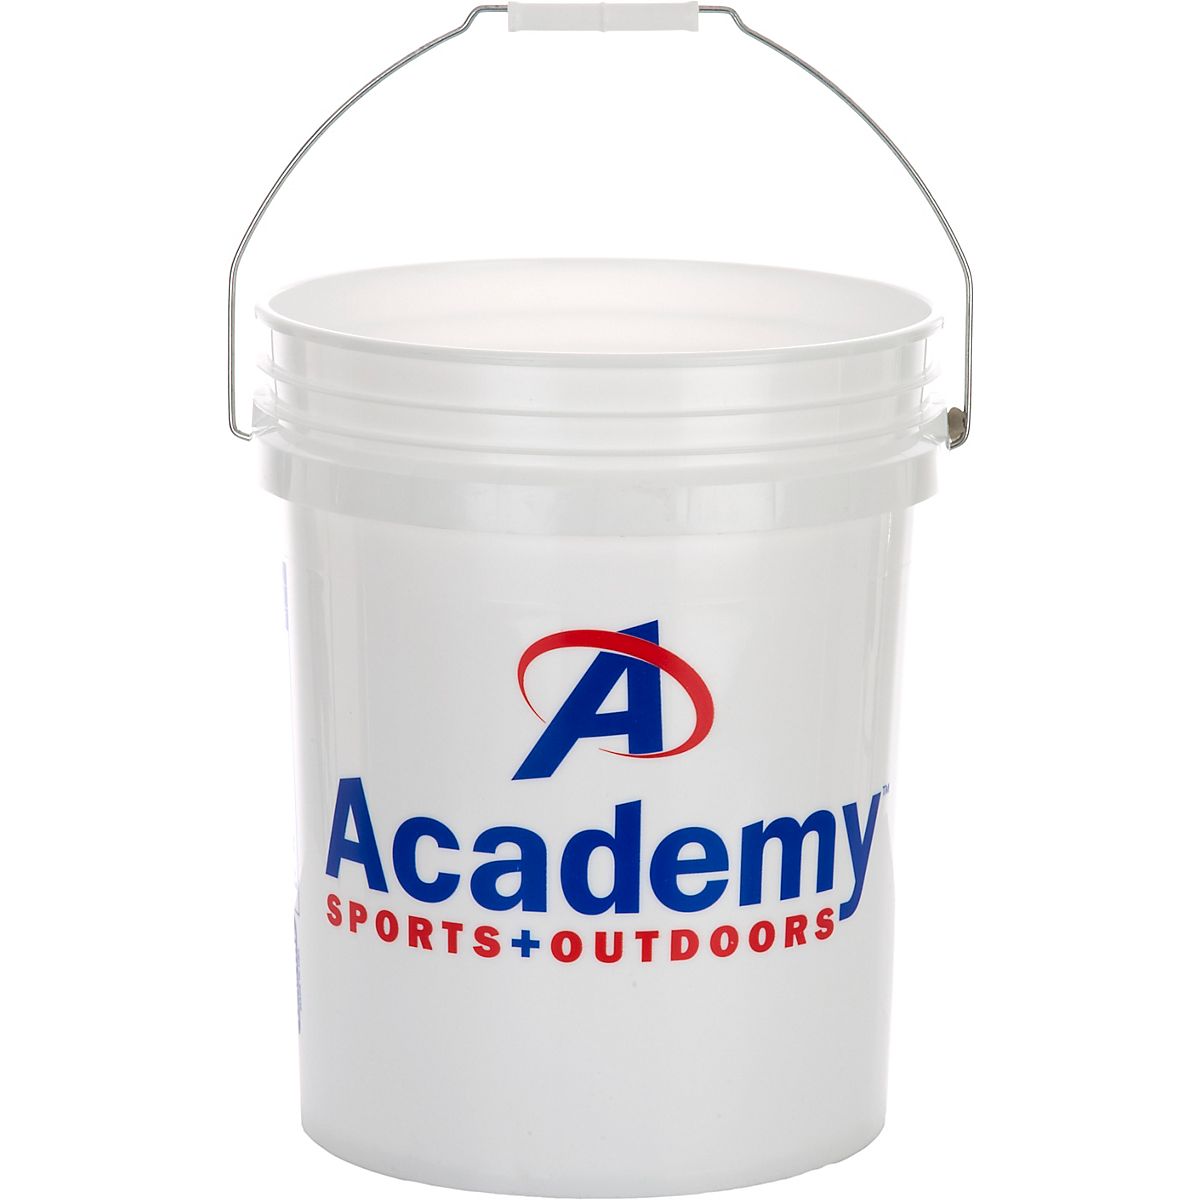  5 Gallon Bucket - Hunting & Fishing Products: Sports & Outdoors